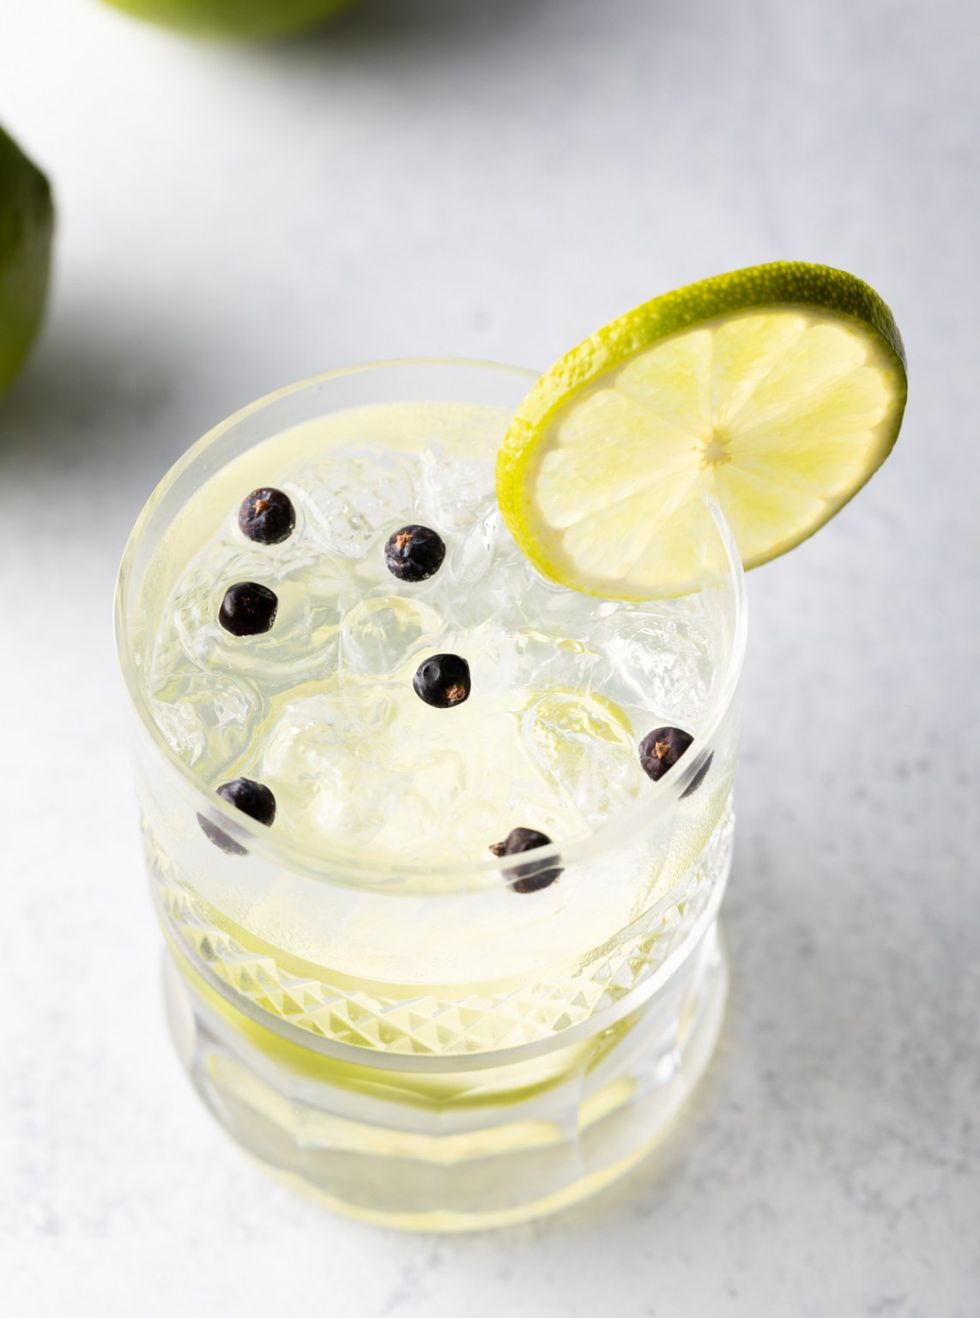 Gin and Tonic is one of the healthiest cocktails